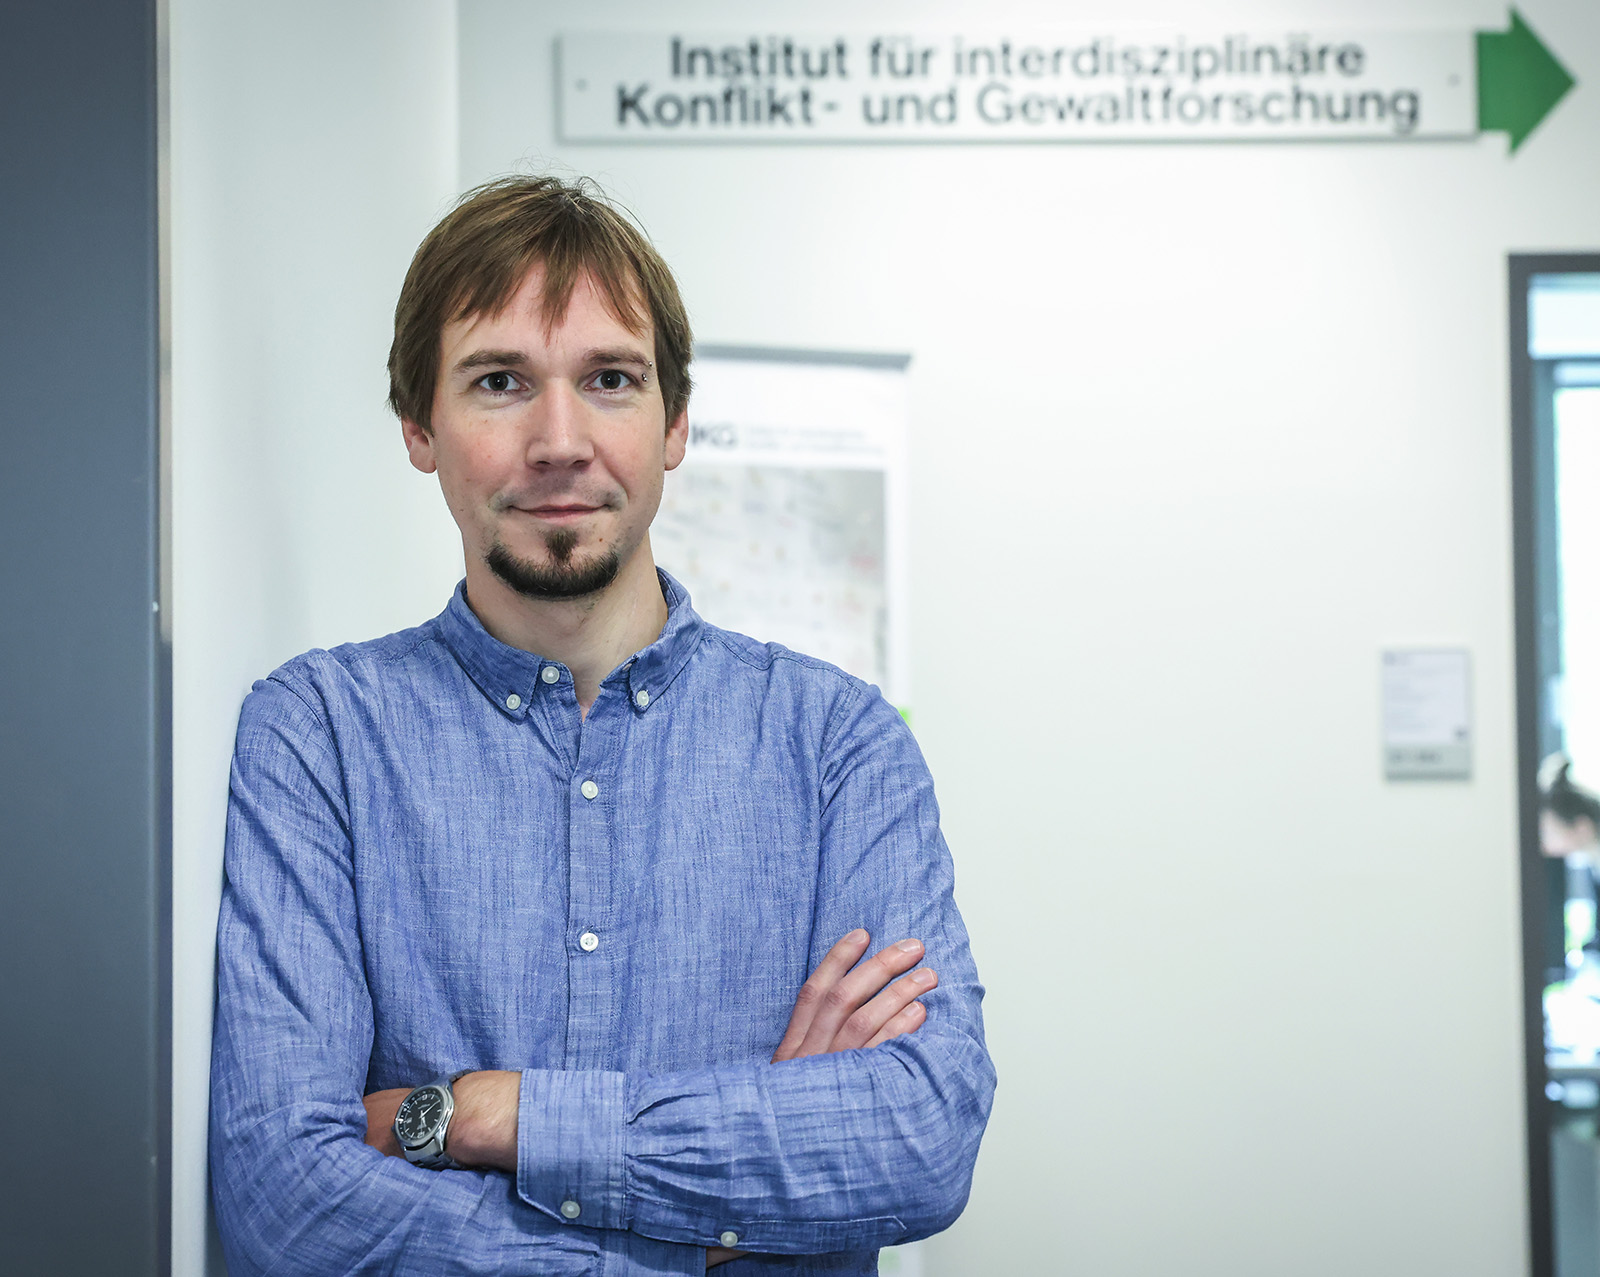 Portrait-Picture of Prof. Tobias Hecker, Faculty of Psychology and Sports Science